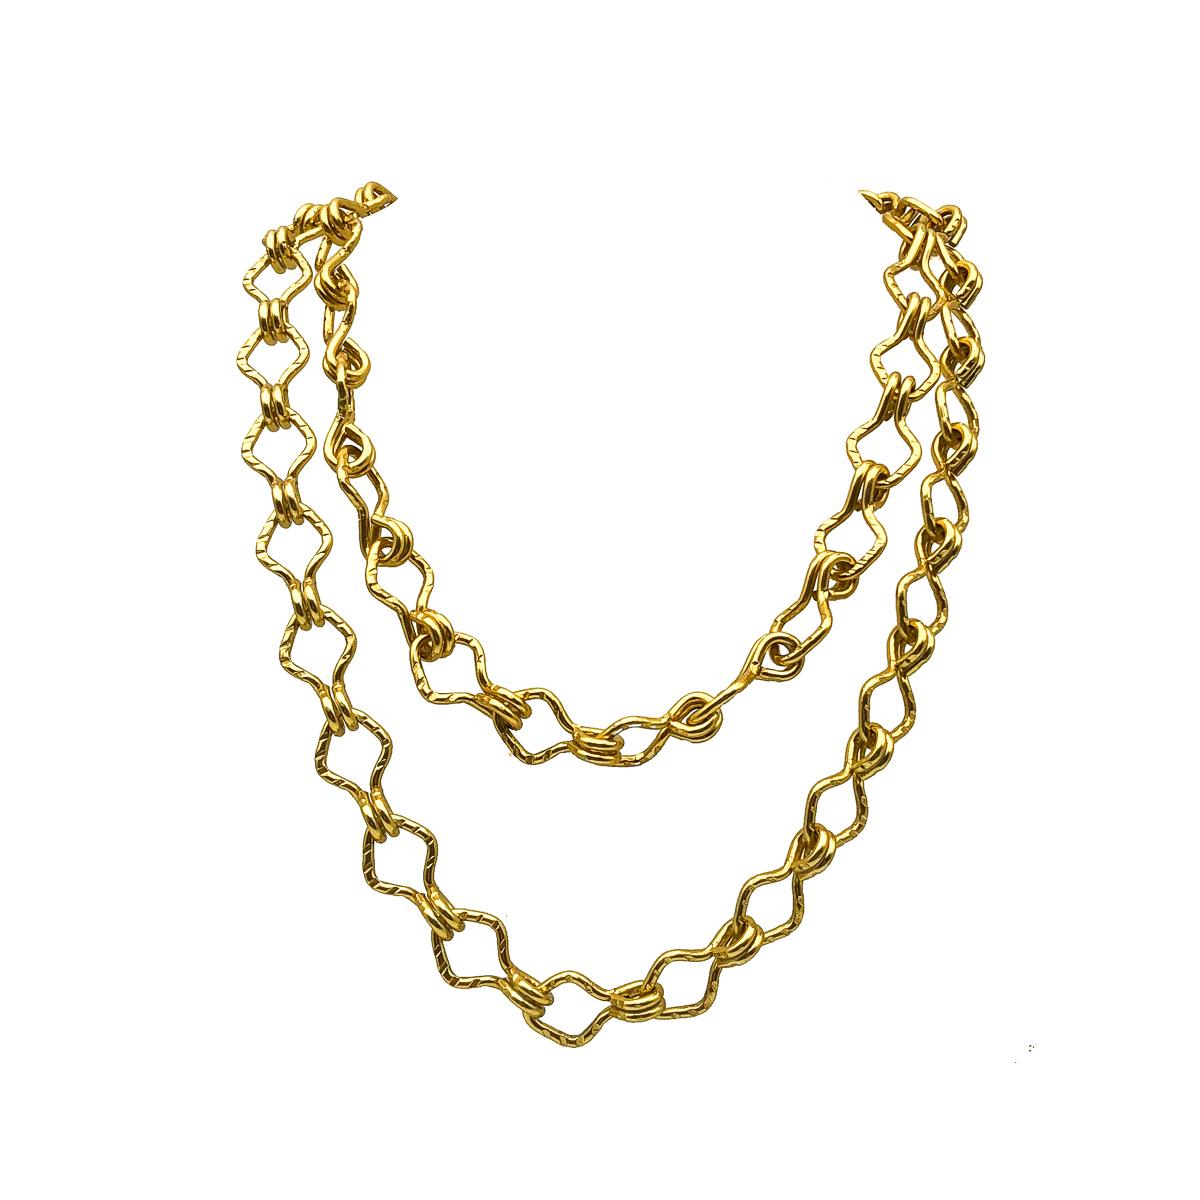 A Vintage Hook Eye Chain. Featuring a long and lightweight hammered effect chain with a wonderfully unusual link style inspired by a hook & eye. 
Vintage Condition: Very good without damage or noteworthy wear. 
Materials: gold tone metal
Signed: